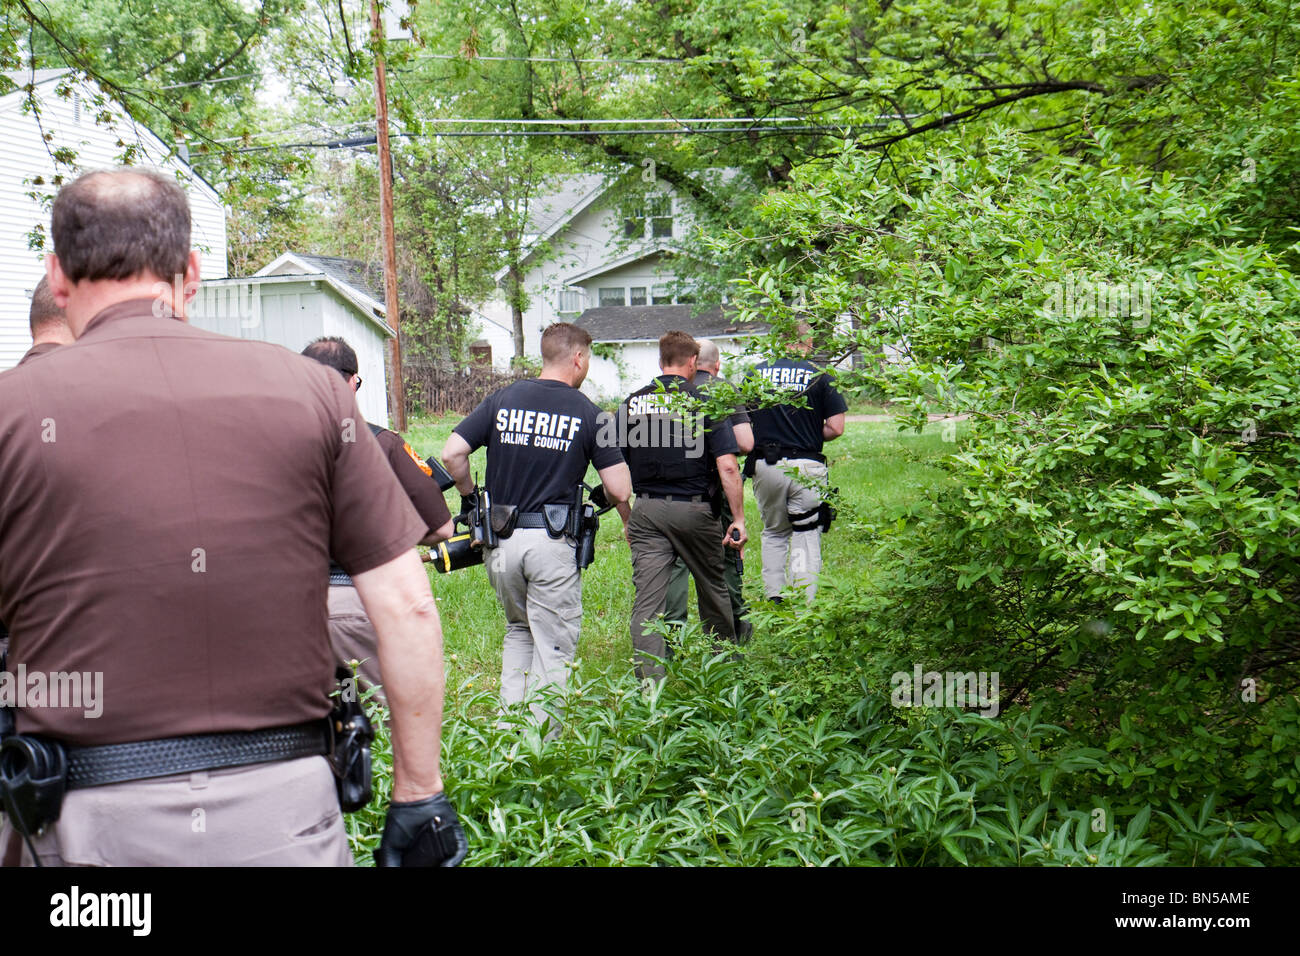 Deputy sheriff's serving drug related search warrant in a rural US community. Narcotics were located inside the residence. Stock Photo